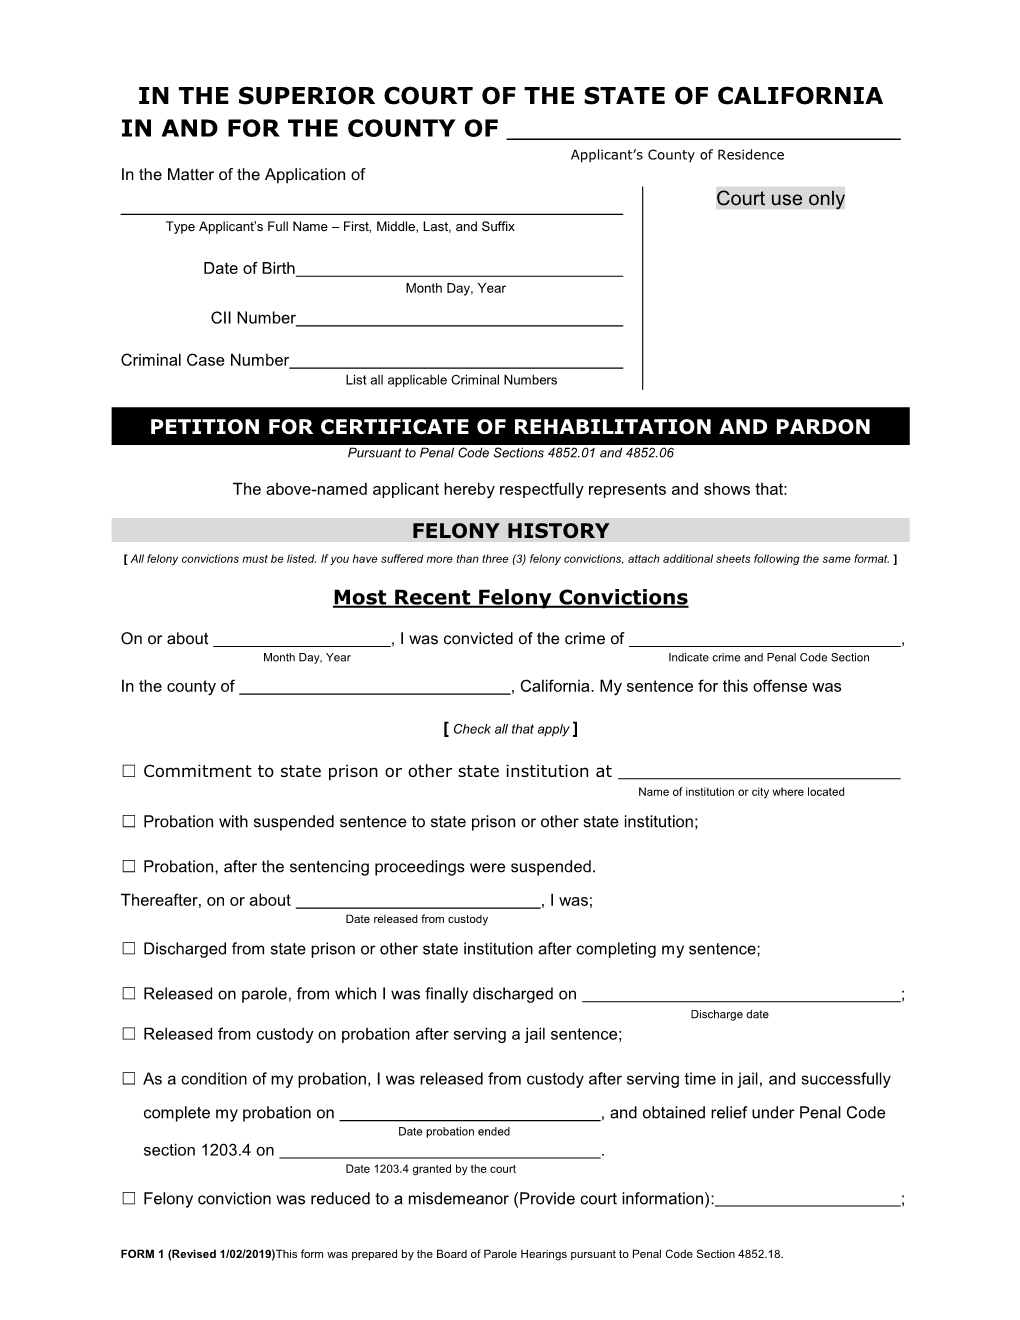 Pardon Application by Certificate Of